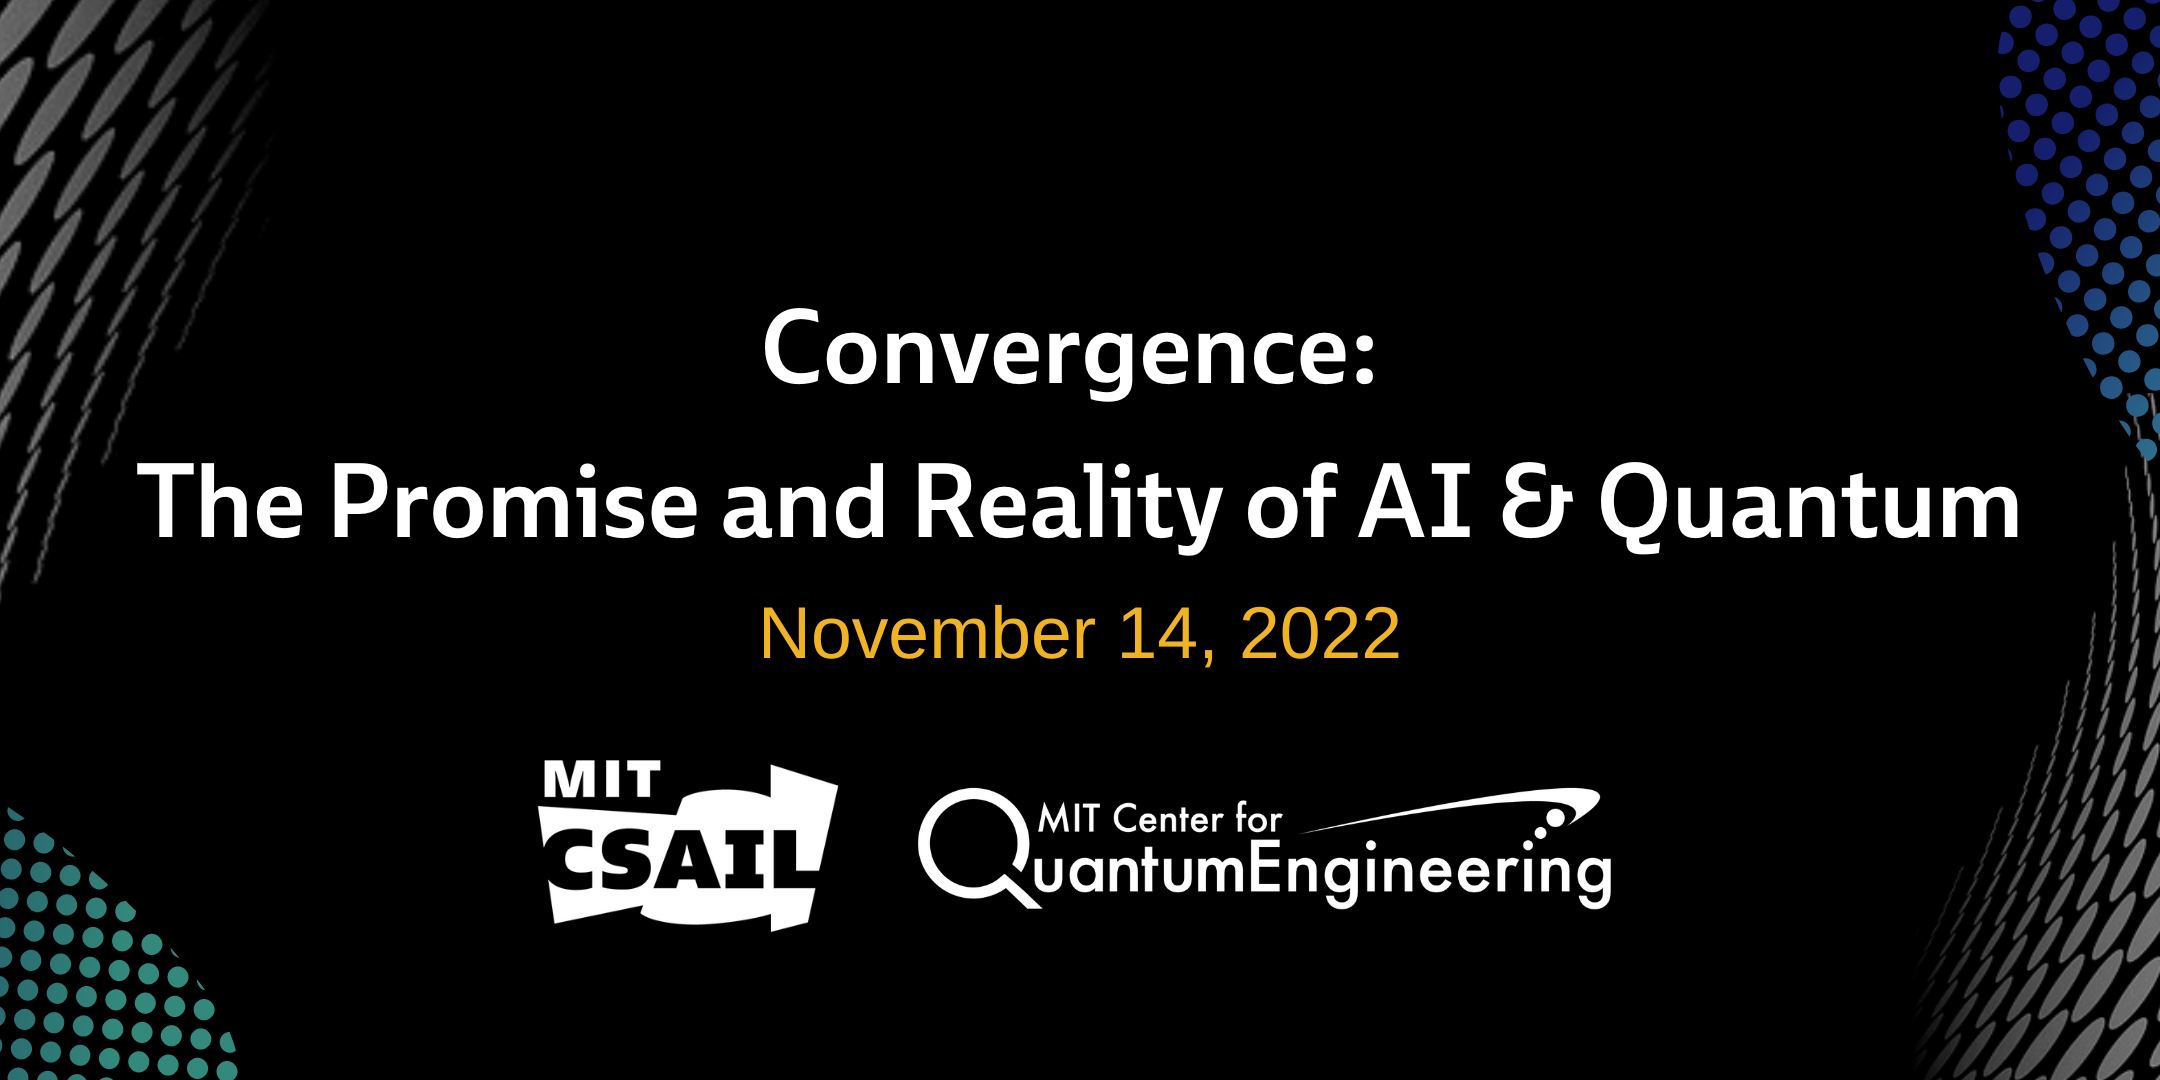 Banner for the 2022 Quantum Computing conference at MIT, with the MIT CSAIL logo and MIT Center for Quantum Engineering Logo 